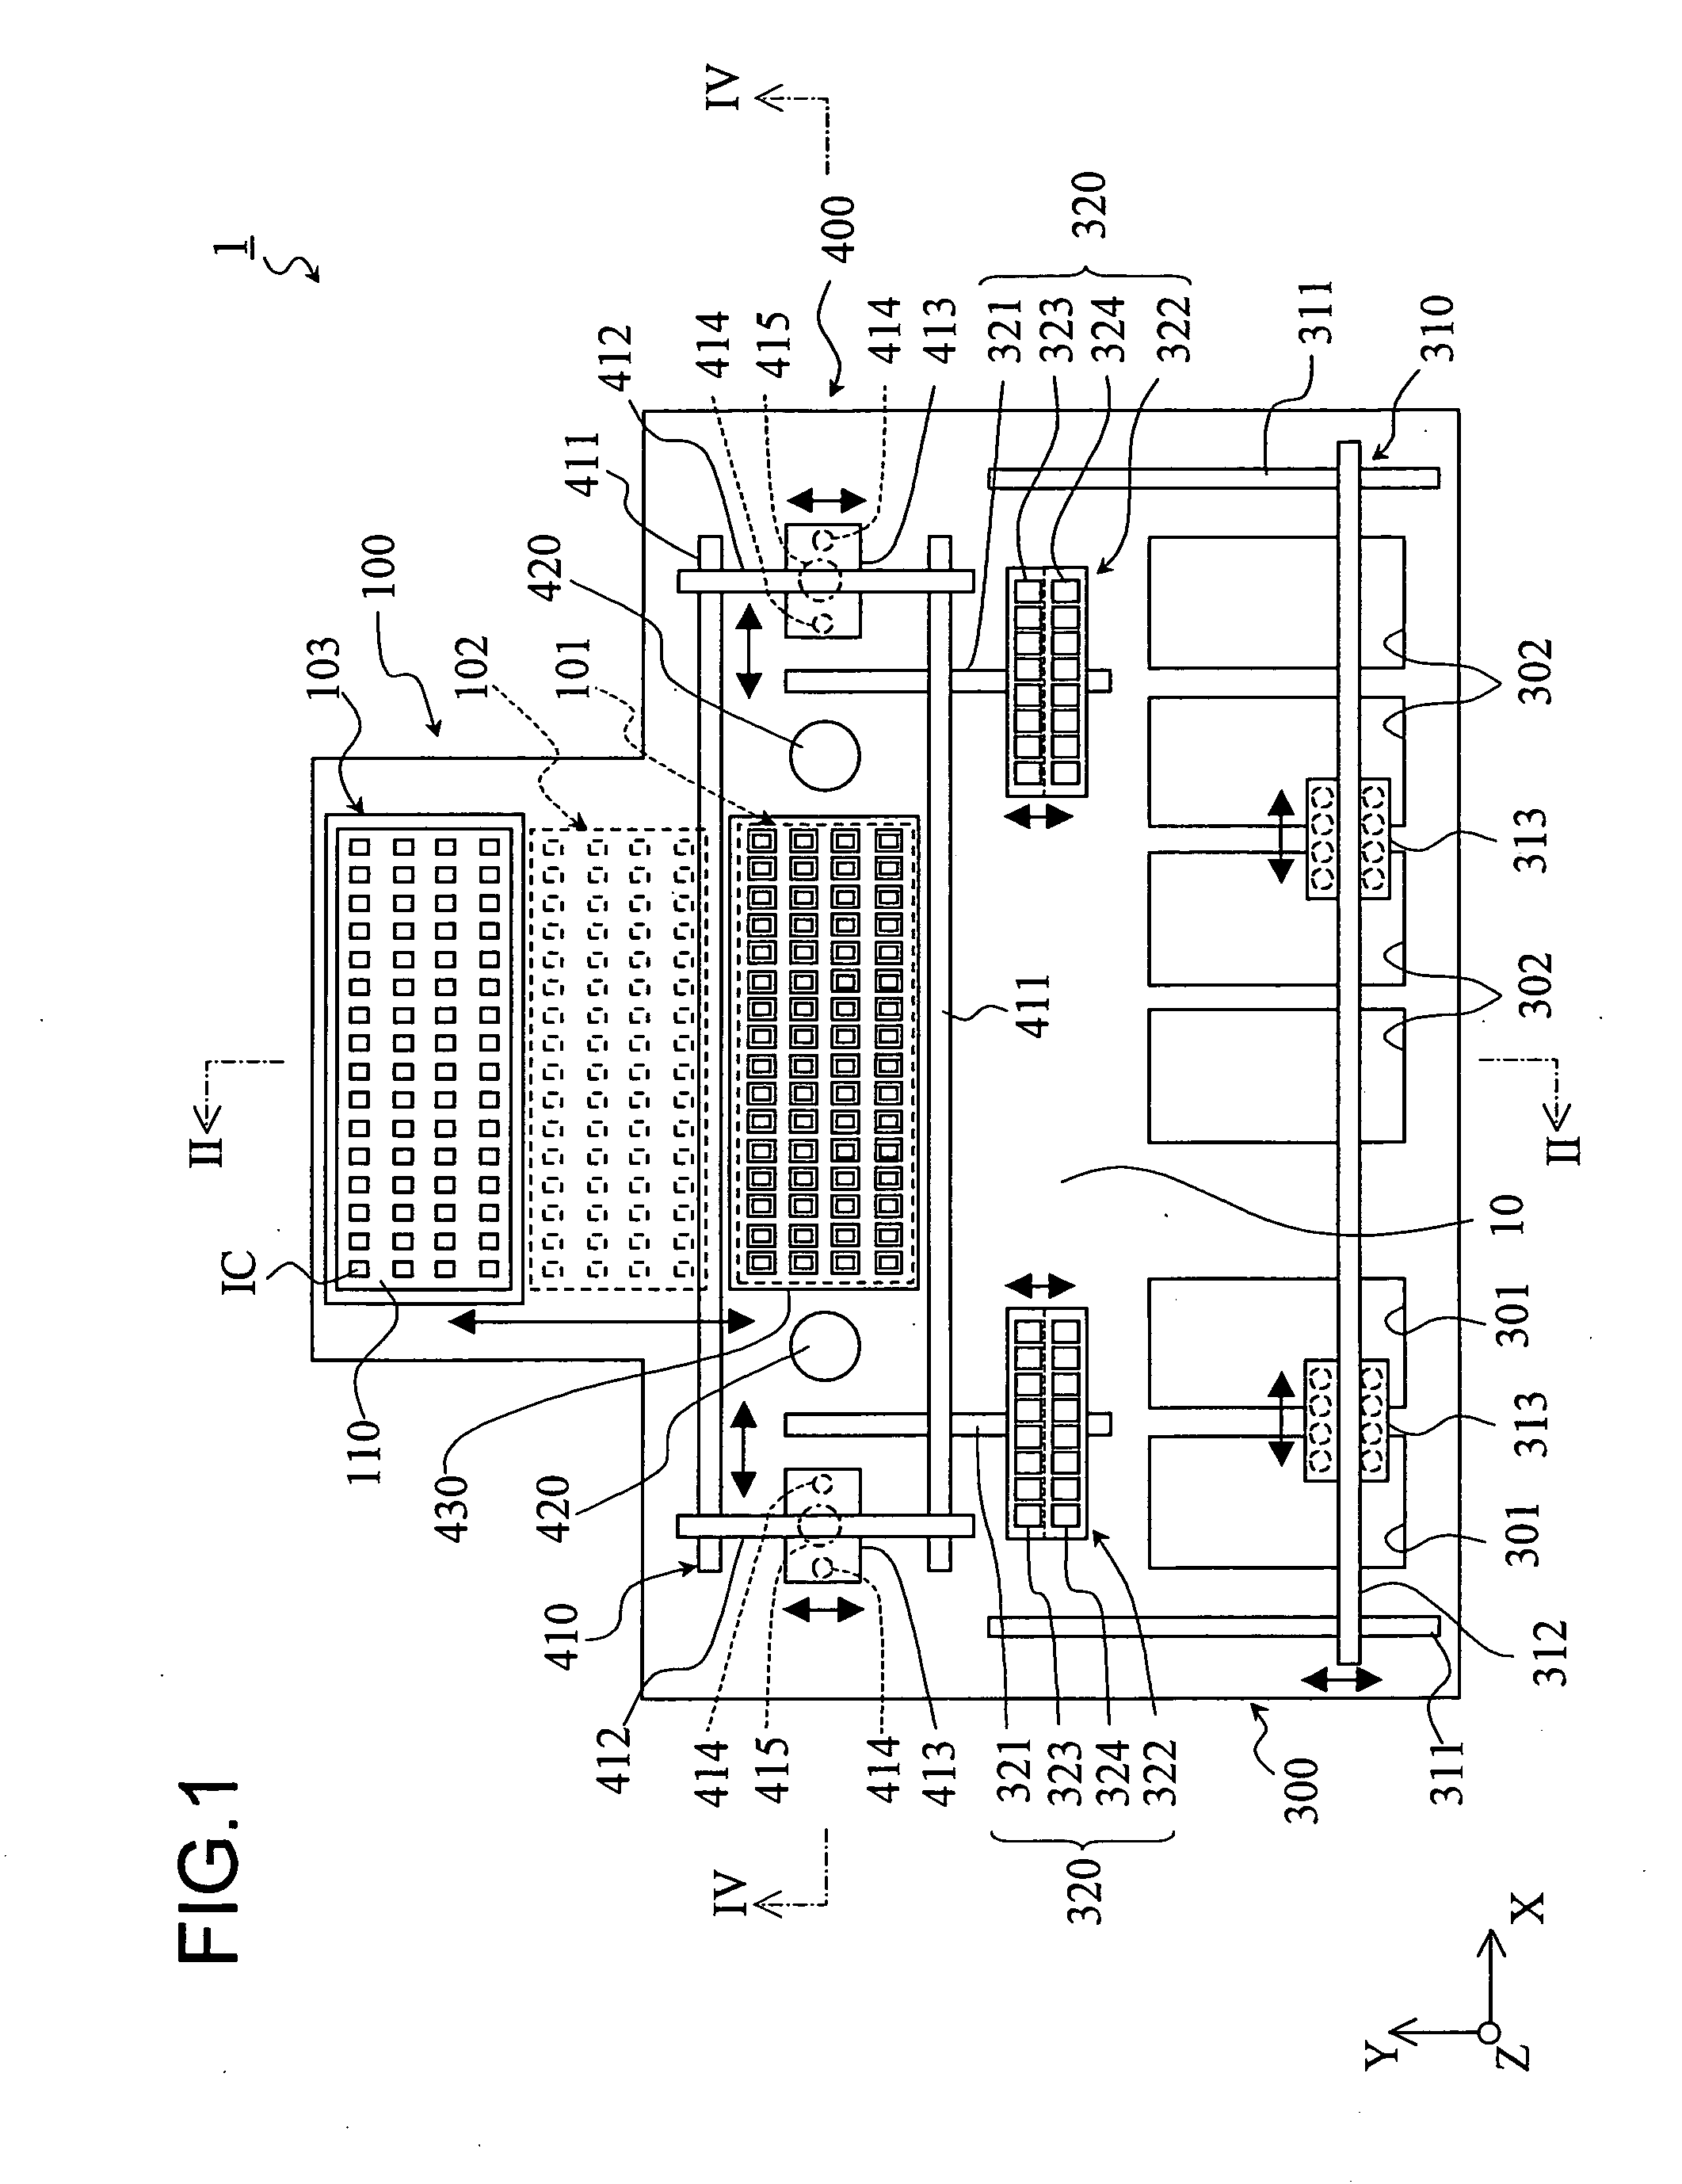 Electronic part test device